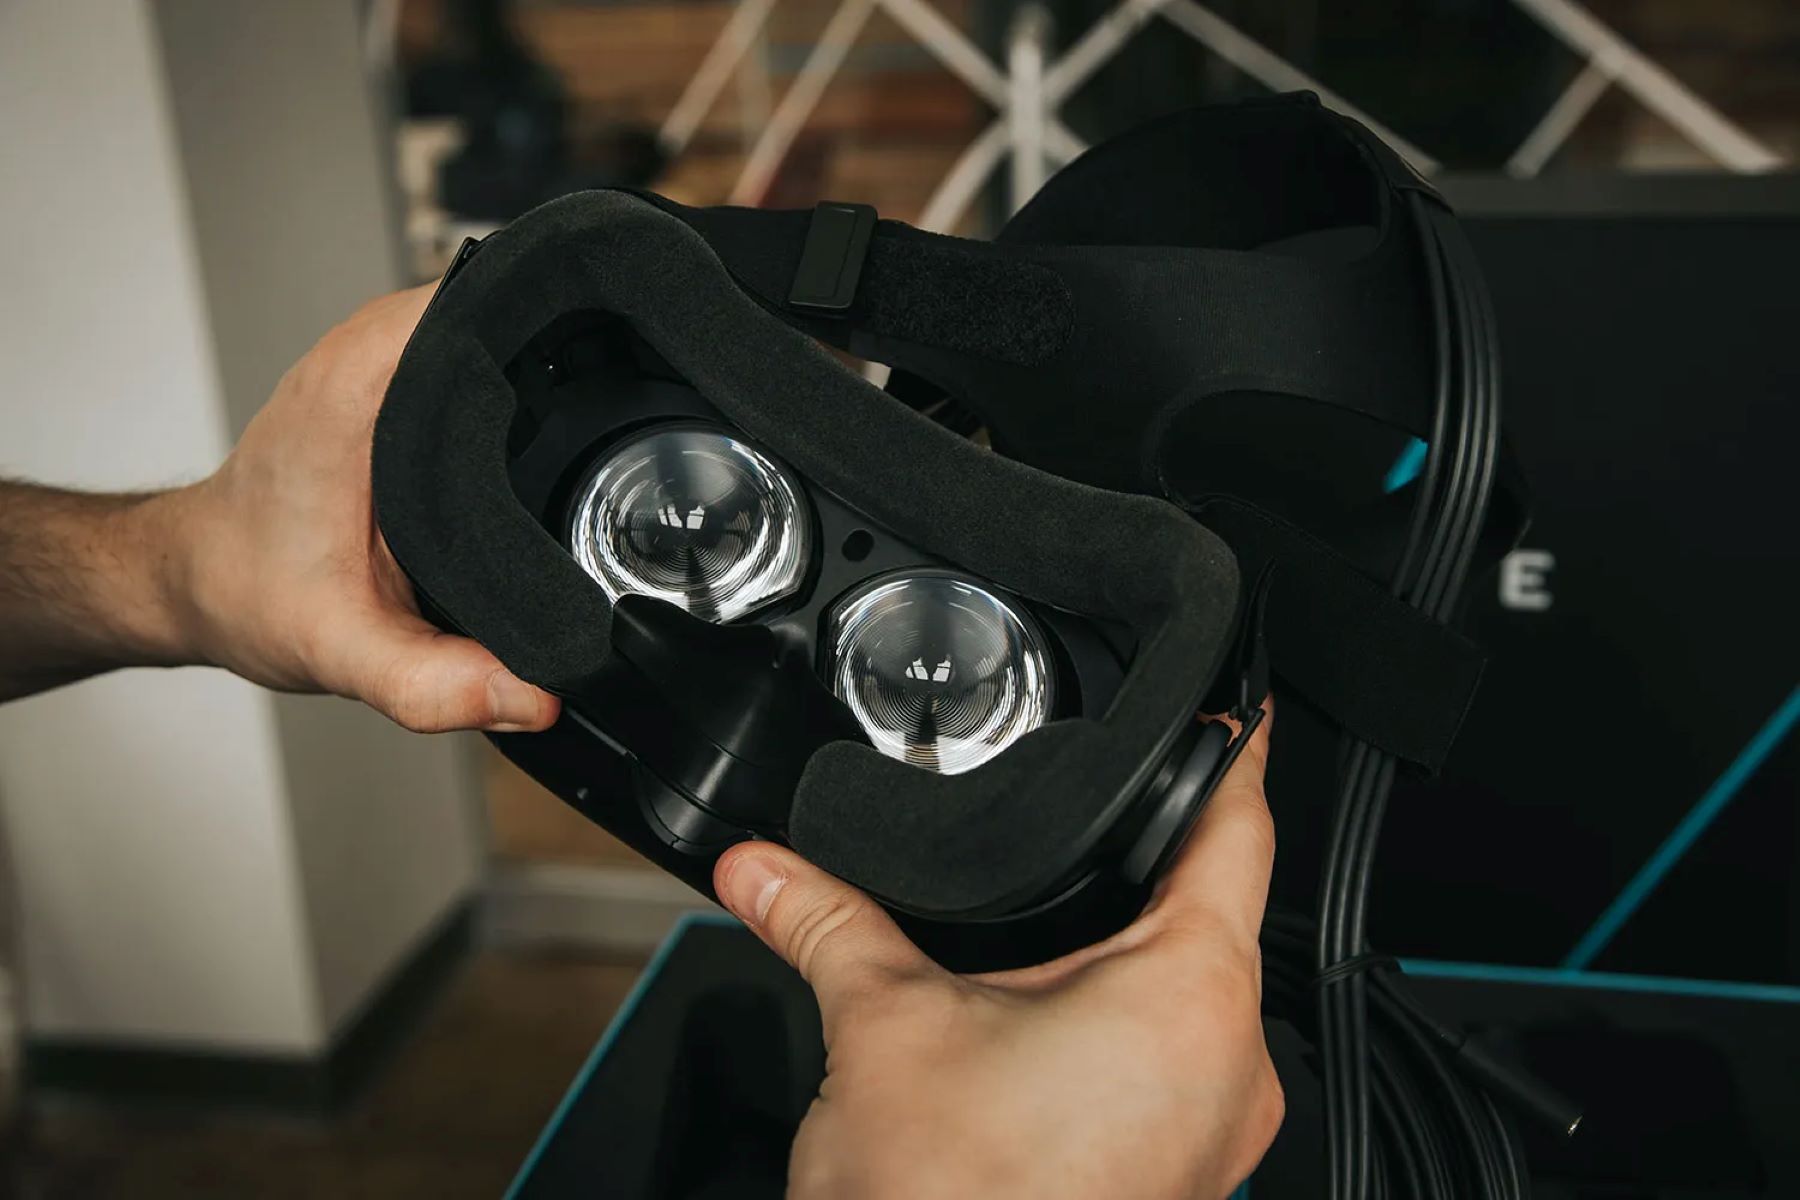 HTC Vive Headset On When Not In Use